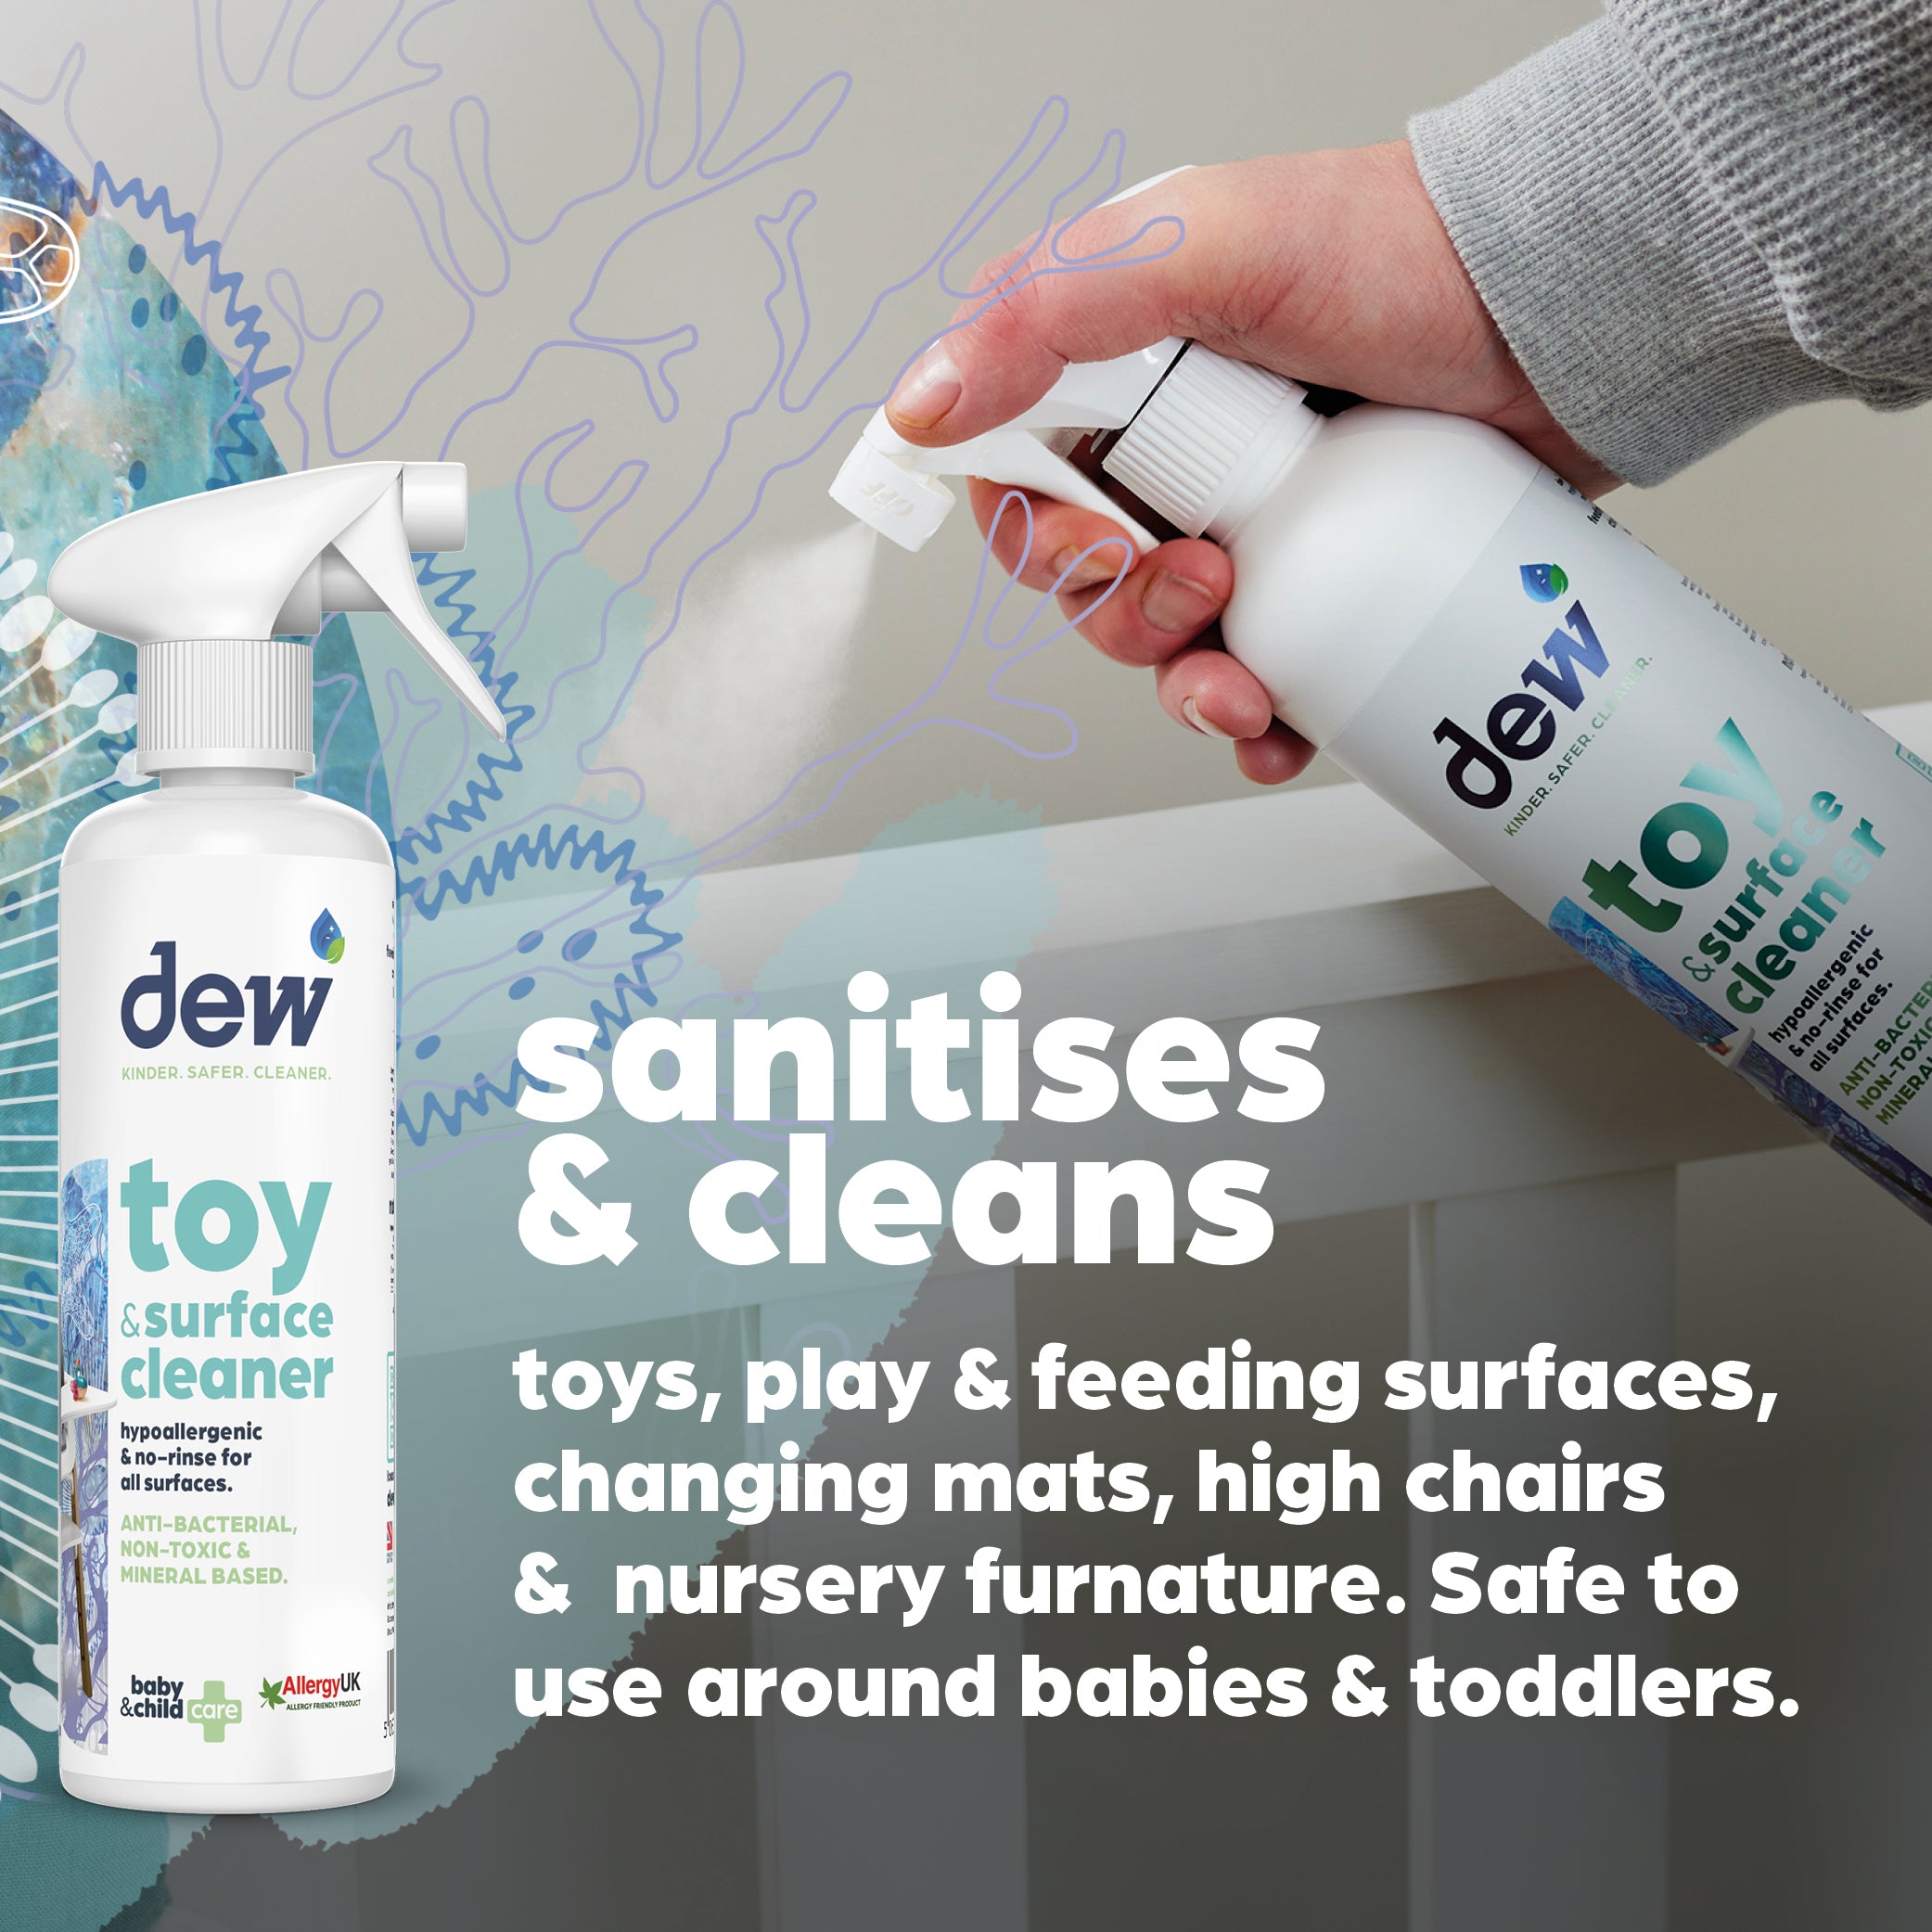 Toy & Surface Cleaner - Sanitises & Cleans